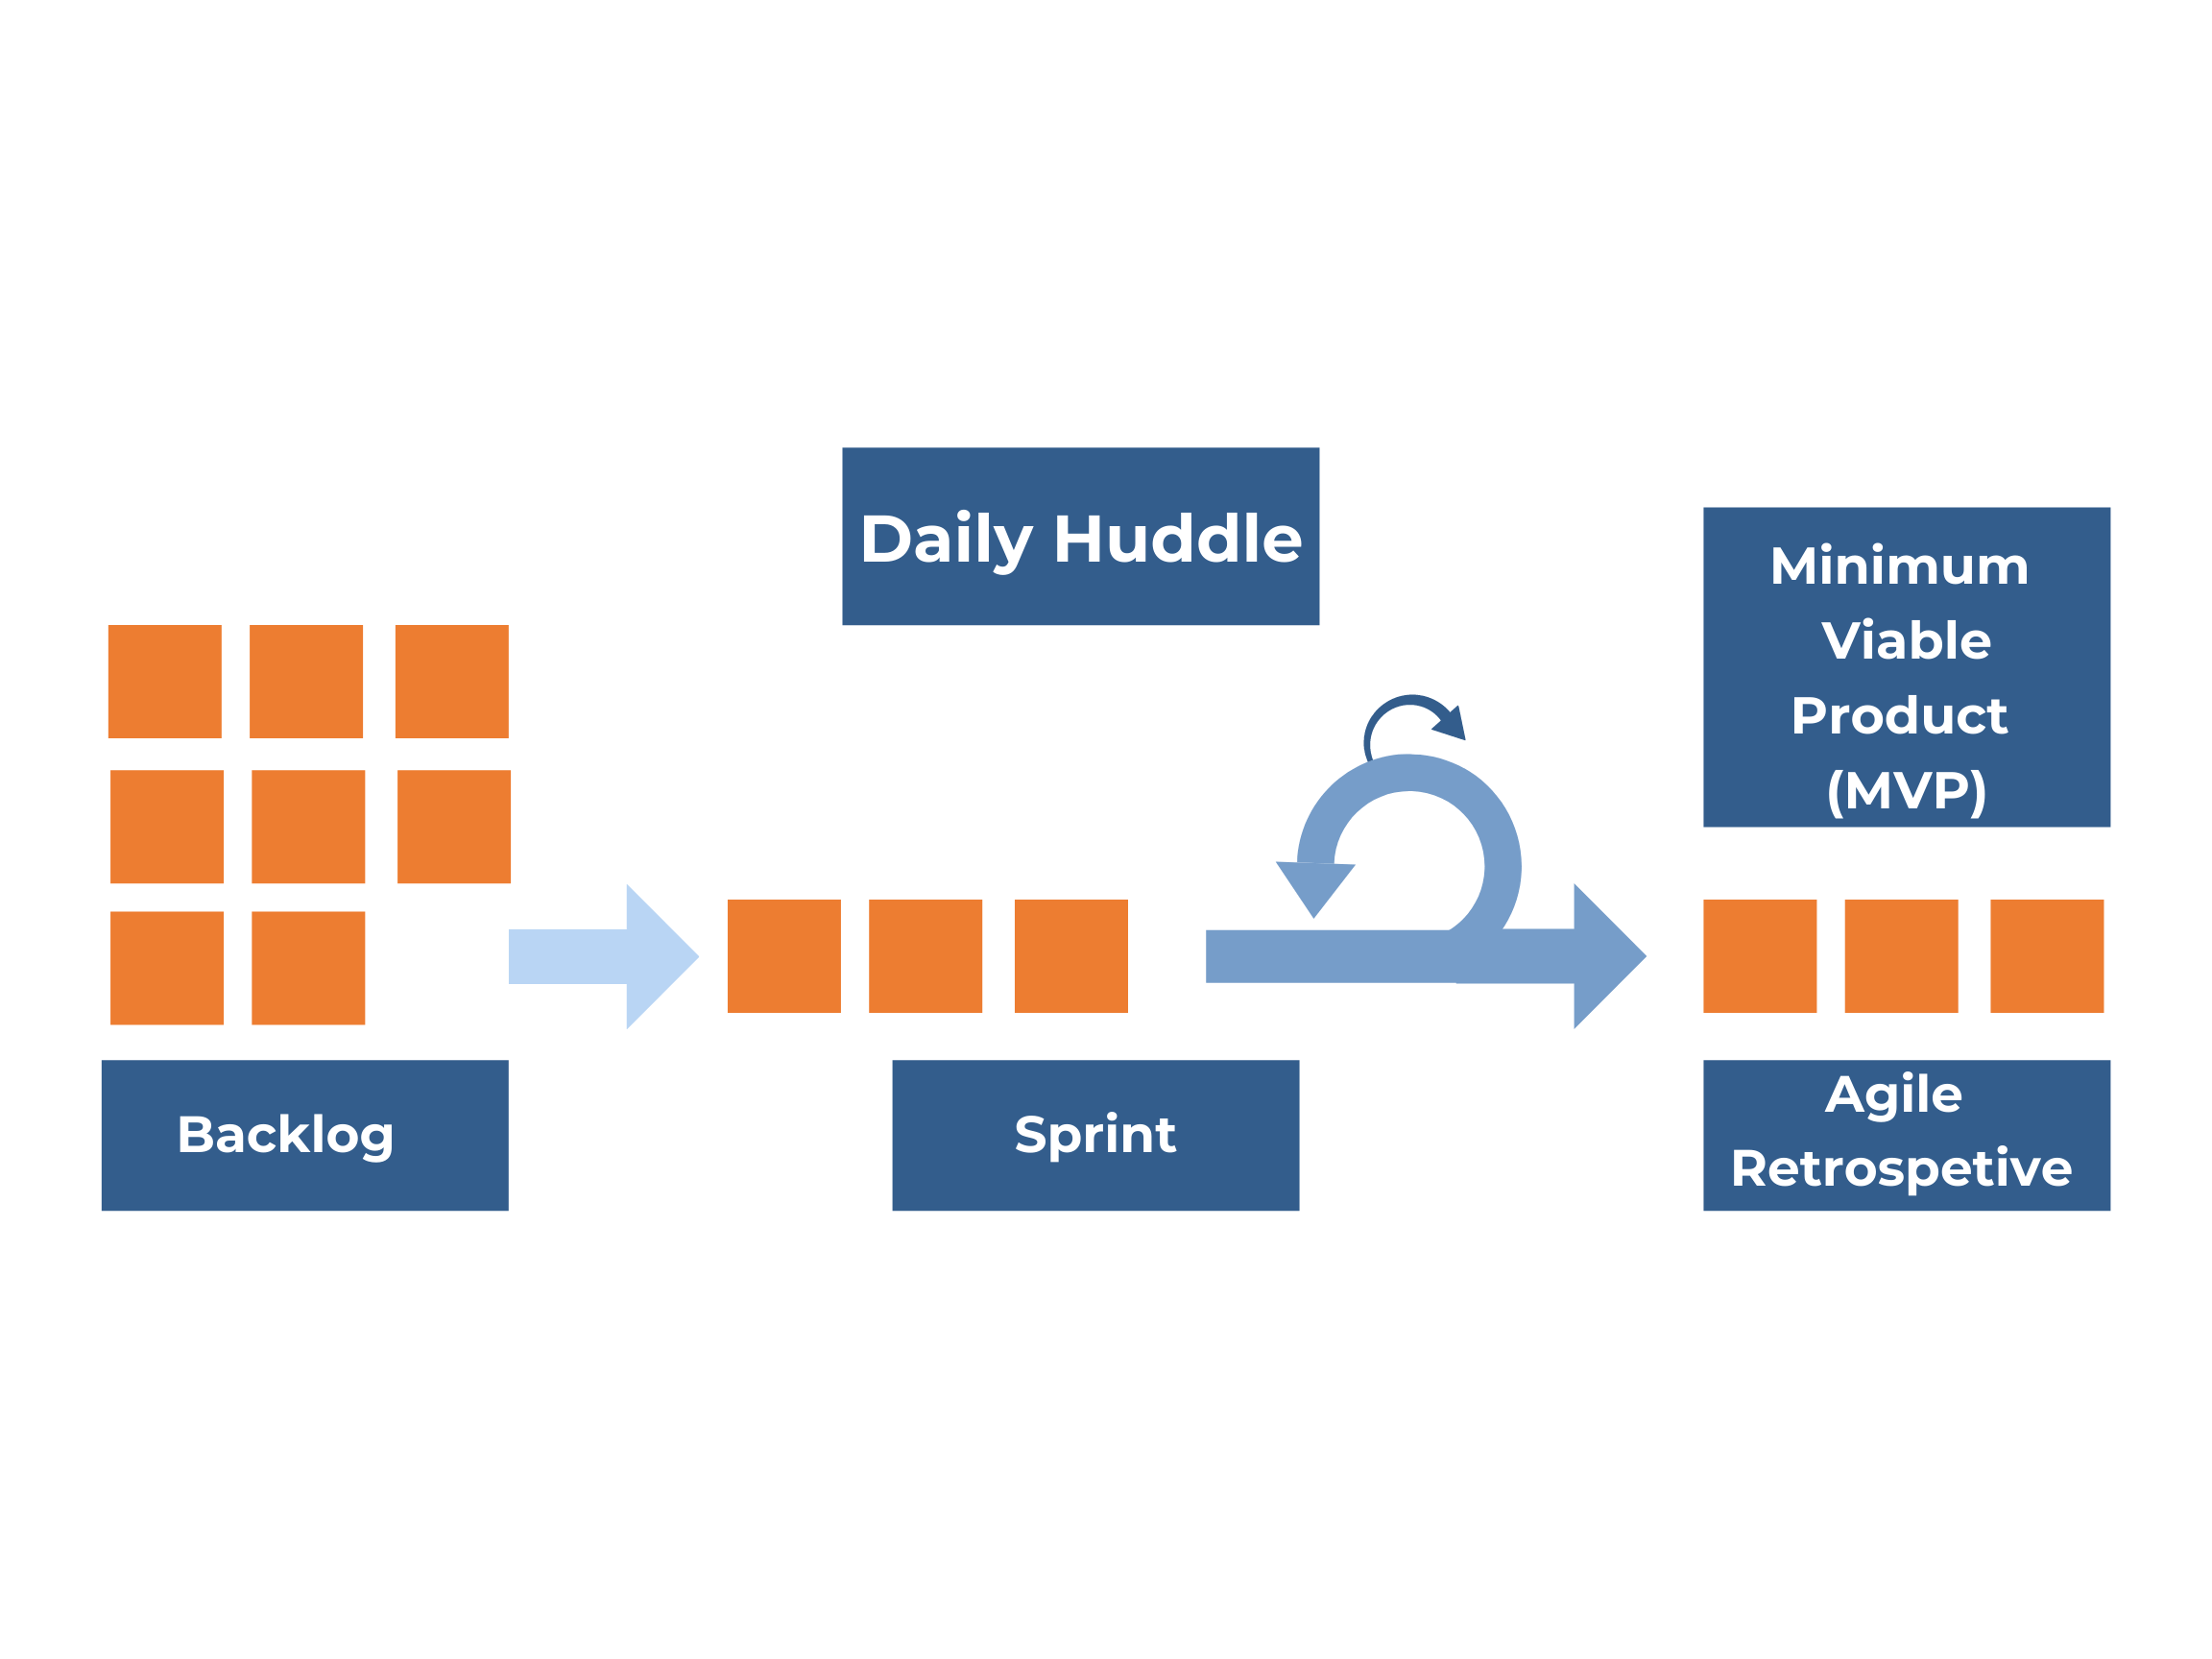 scitrain scrum sprints take prototype products or services that have been previously created and refine test implement and scale them to be used in day to day business